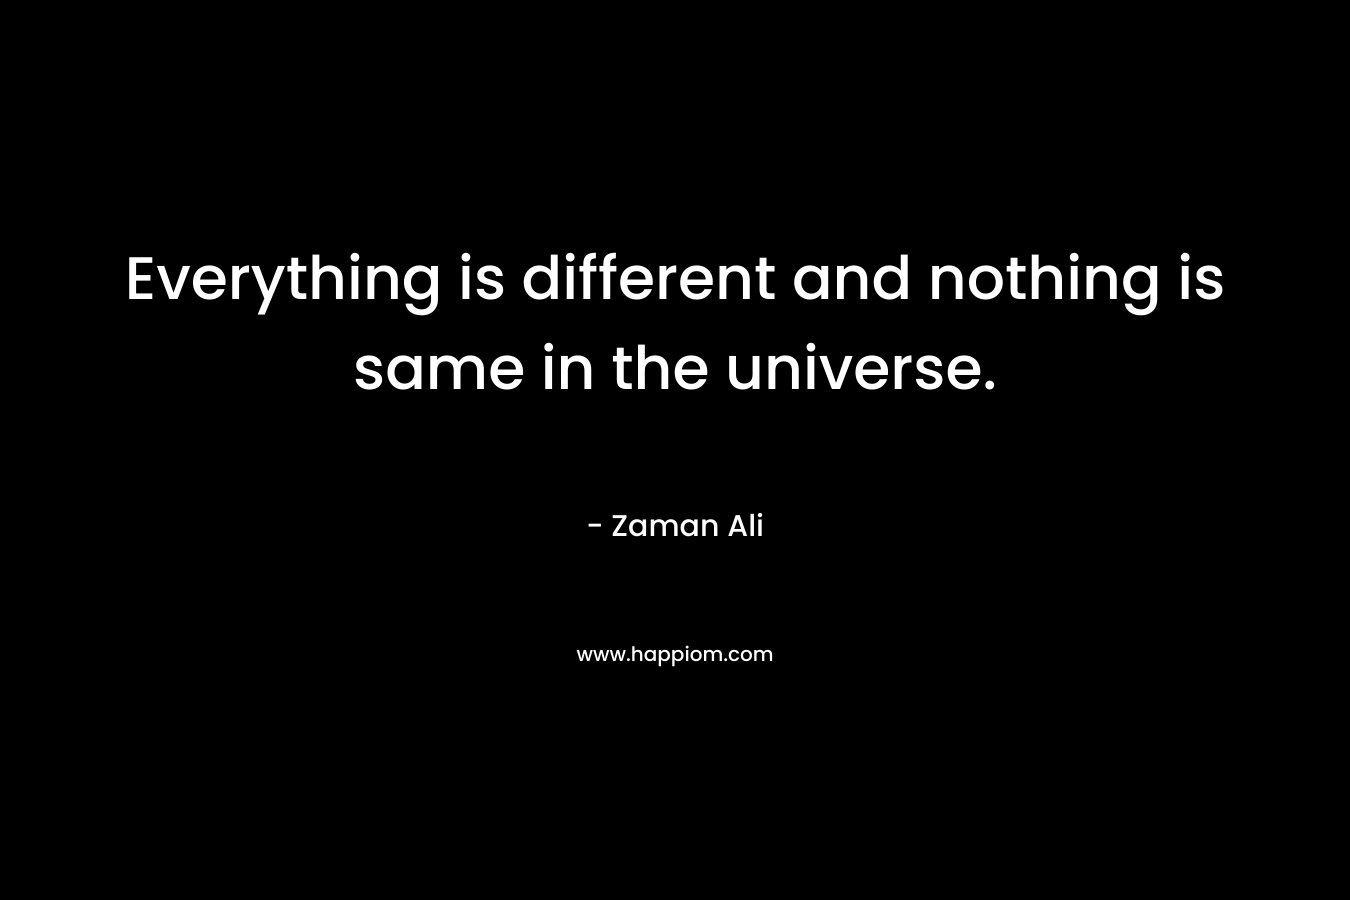 Everything is different and nothing is same in the universe.